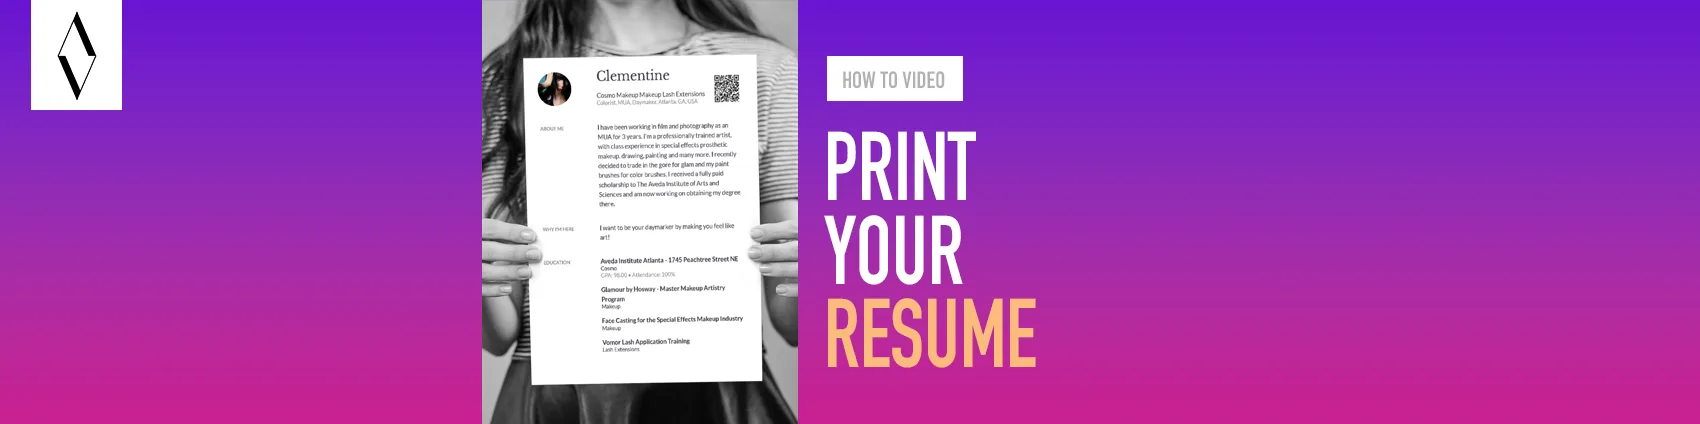 NEW* HOW TO SERIES: Print Your Resume